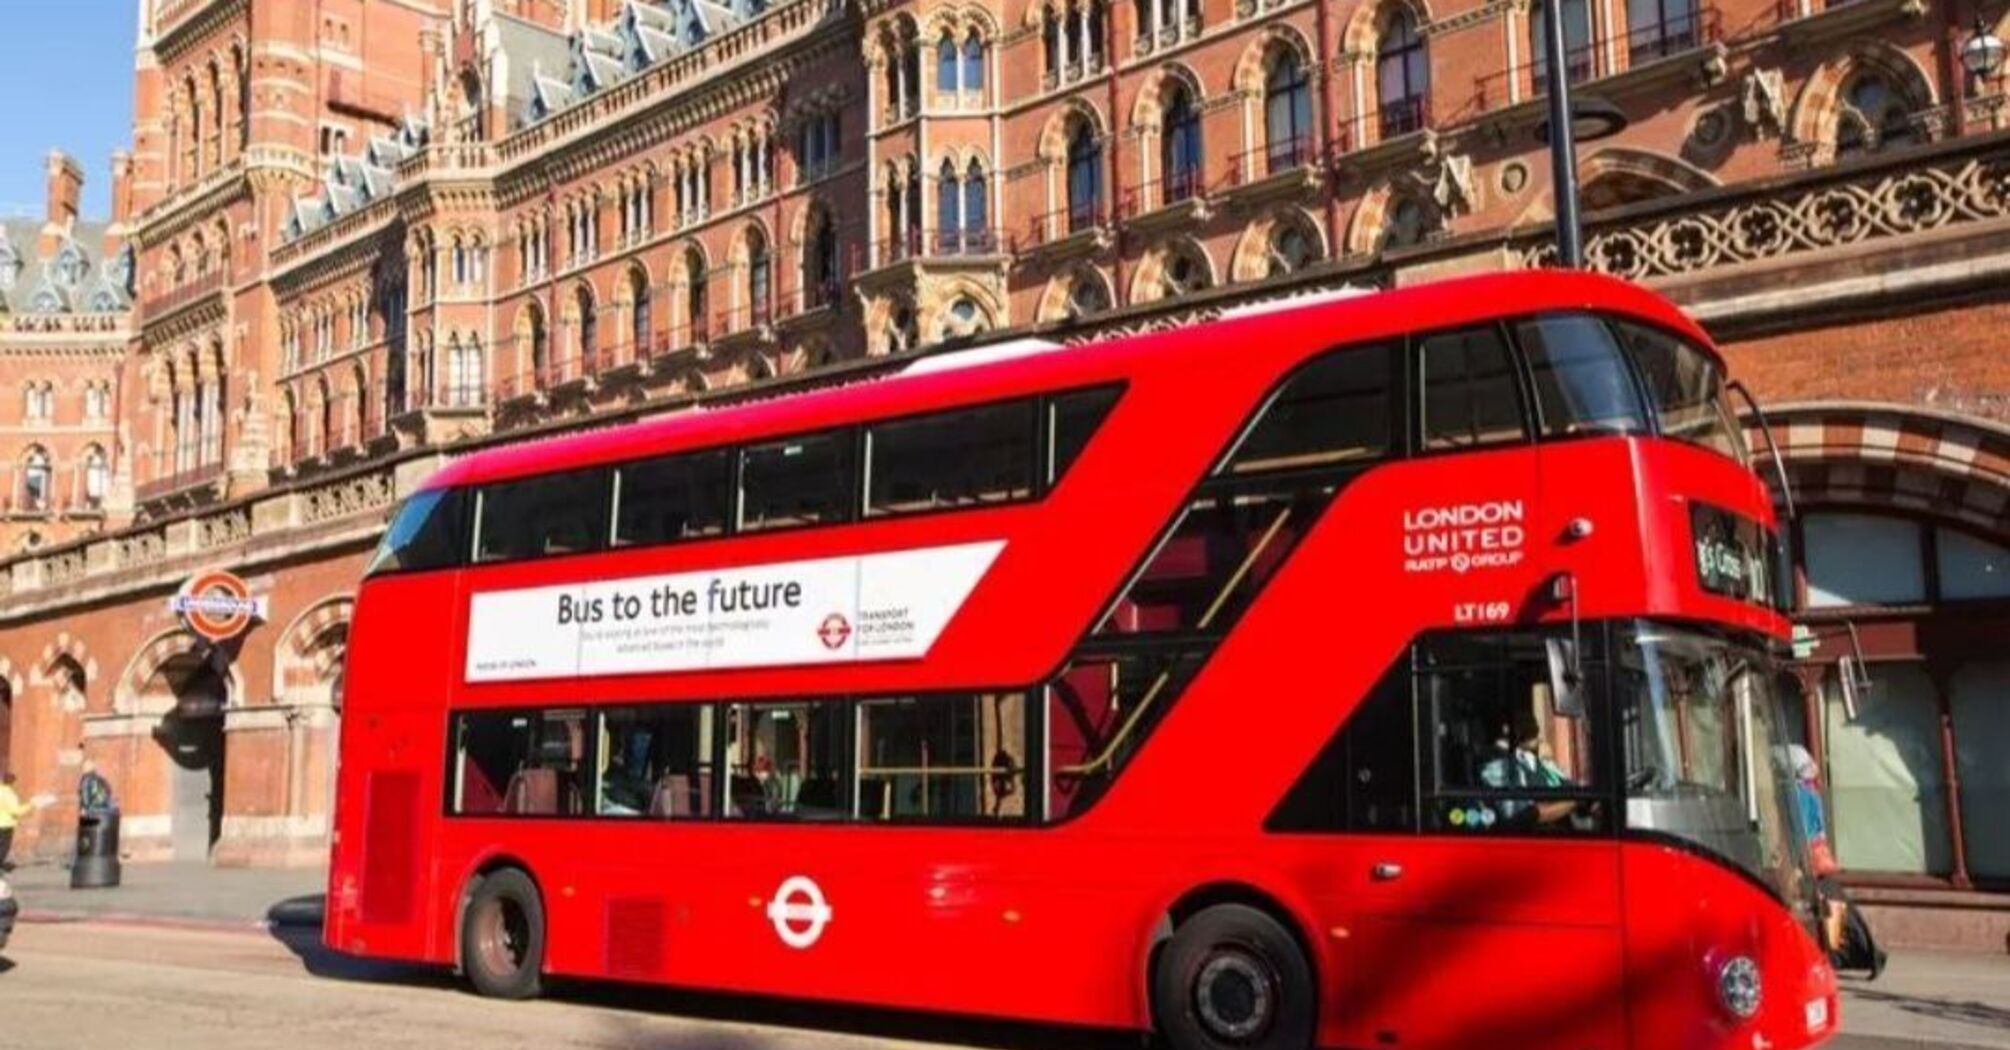 "They have better floors than my house": Londoners are impressed with new buses in the city